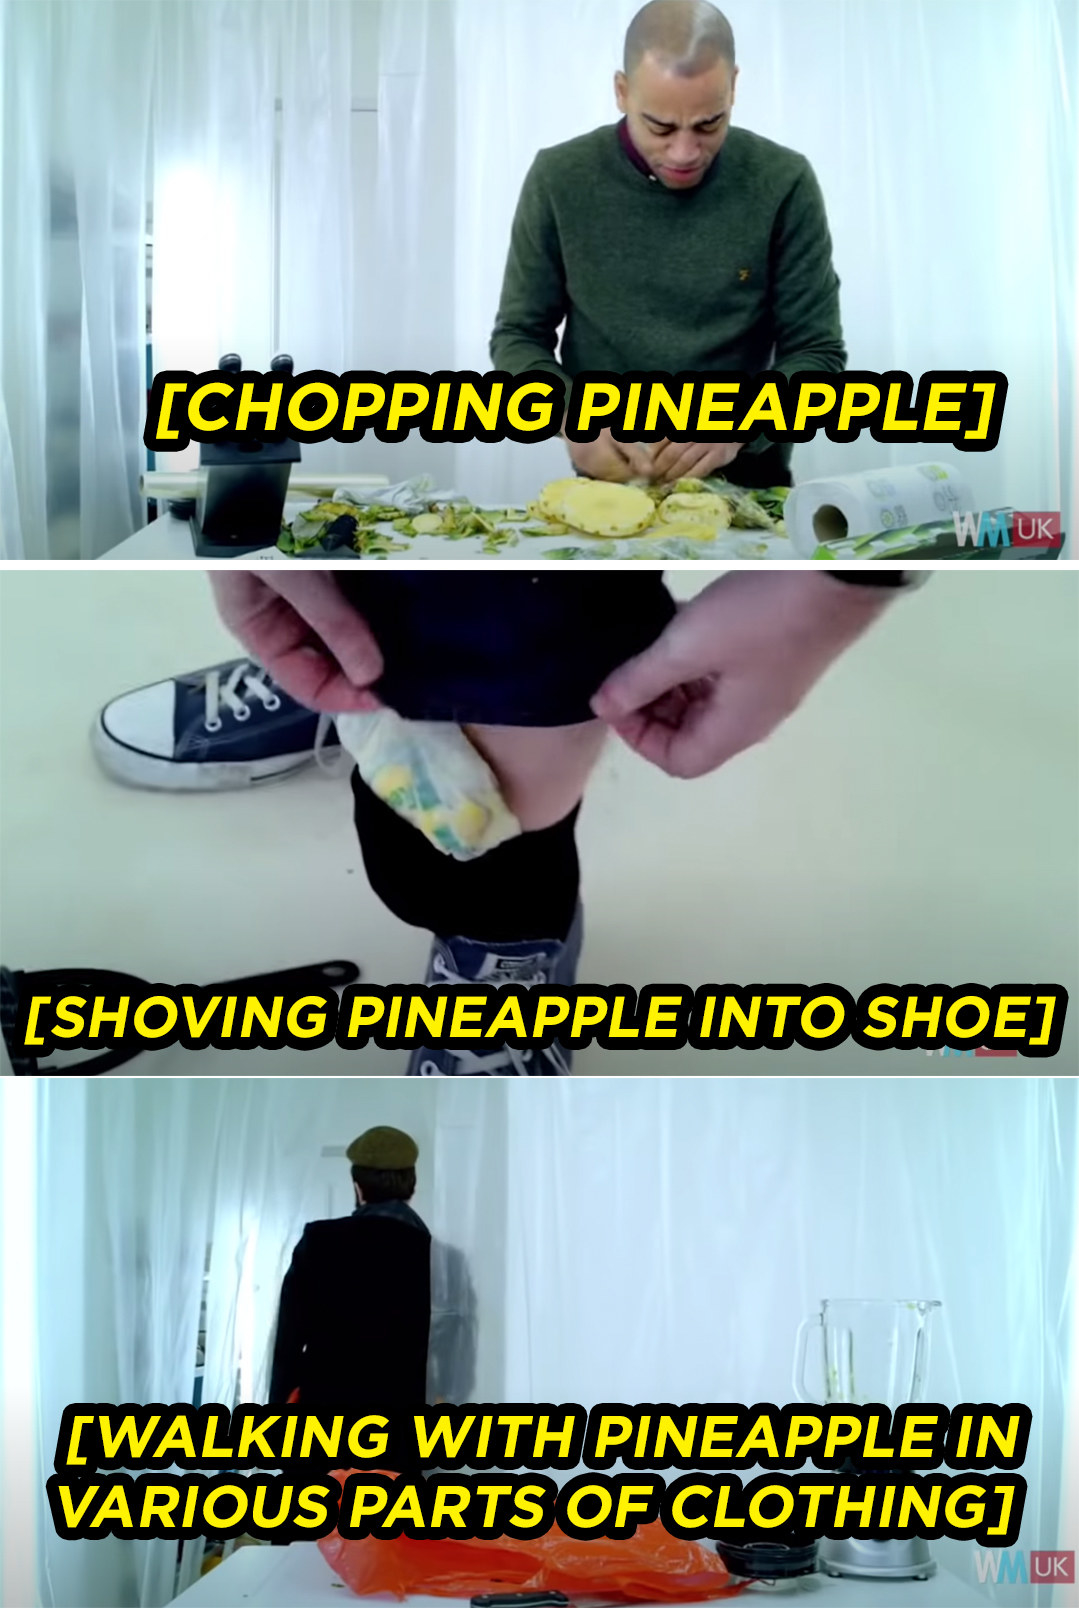 a man is at a table in an empty room, chopping up pineapple. in the next image he is shoving a bag of that pineapple into a show, and in the next he is walking away with pineapple in his shoe